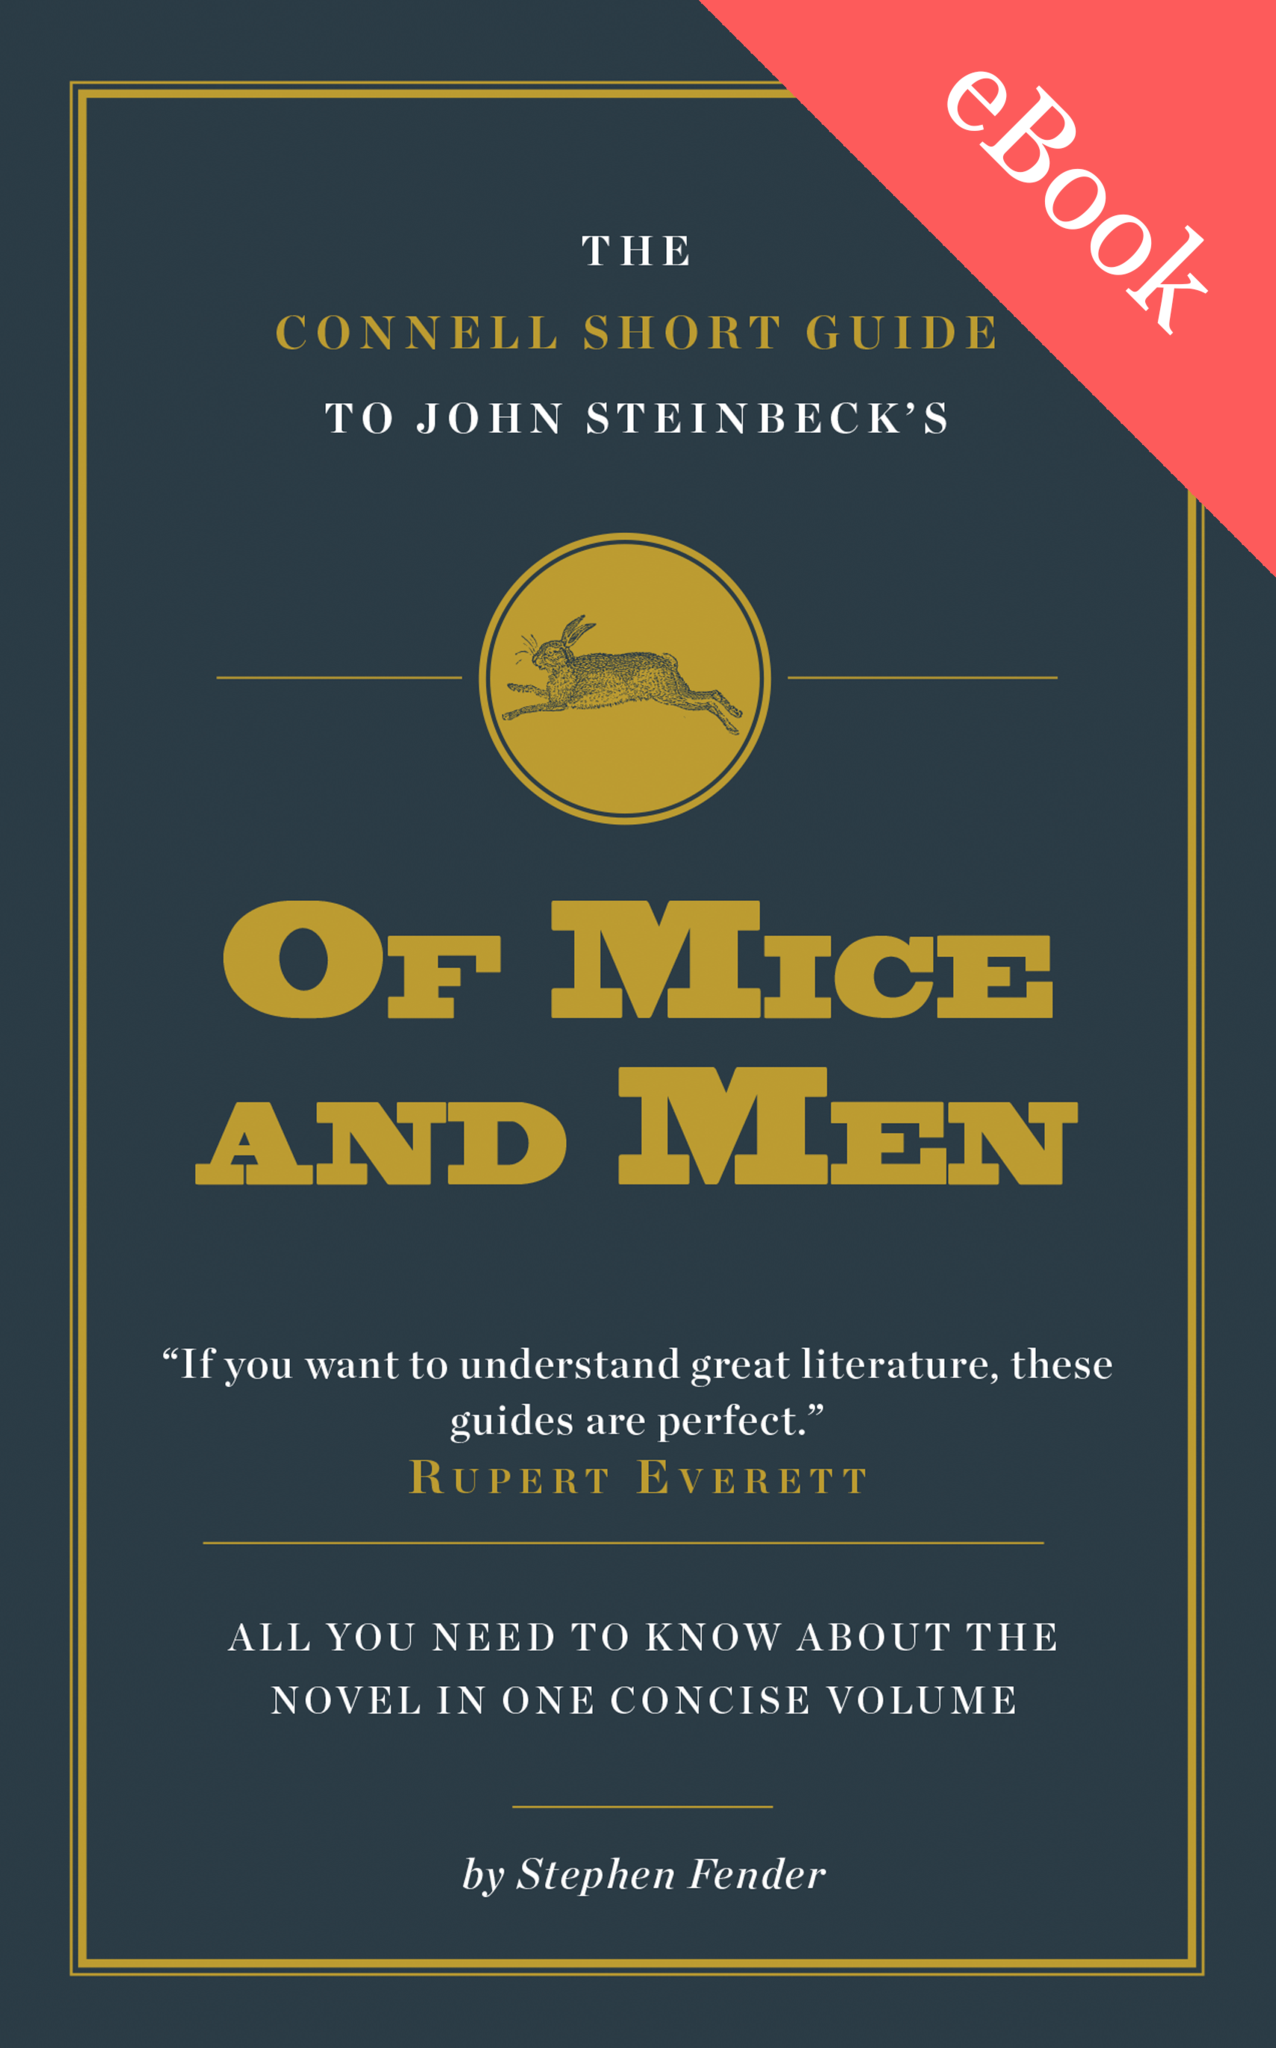 John Steinbeck's Of Mice and Men Short Study Guide